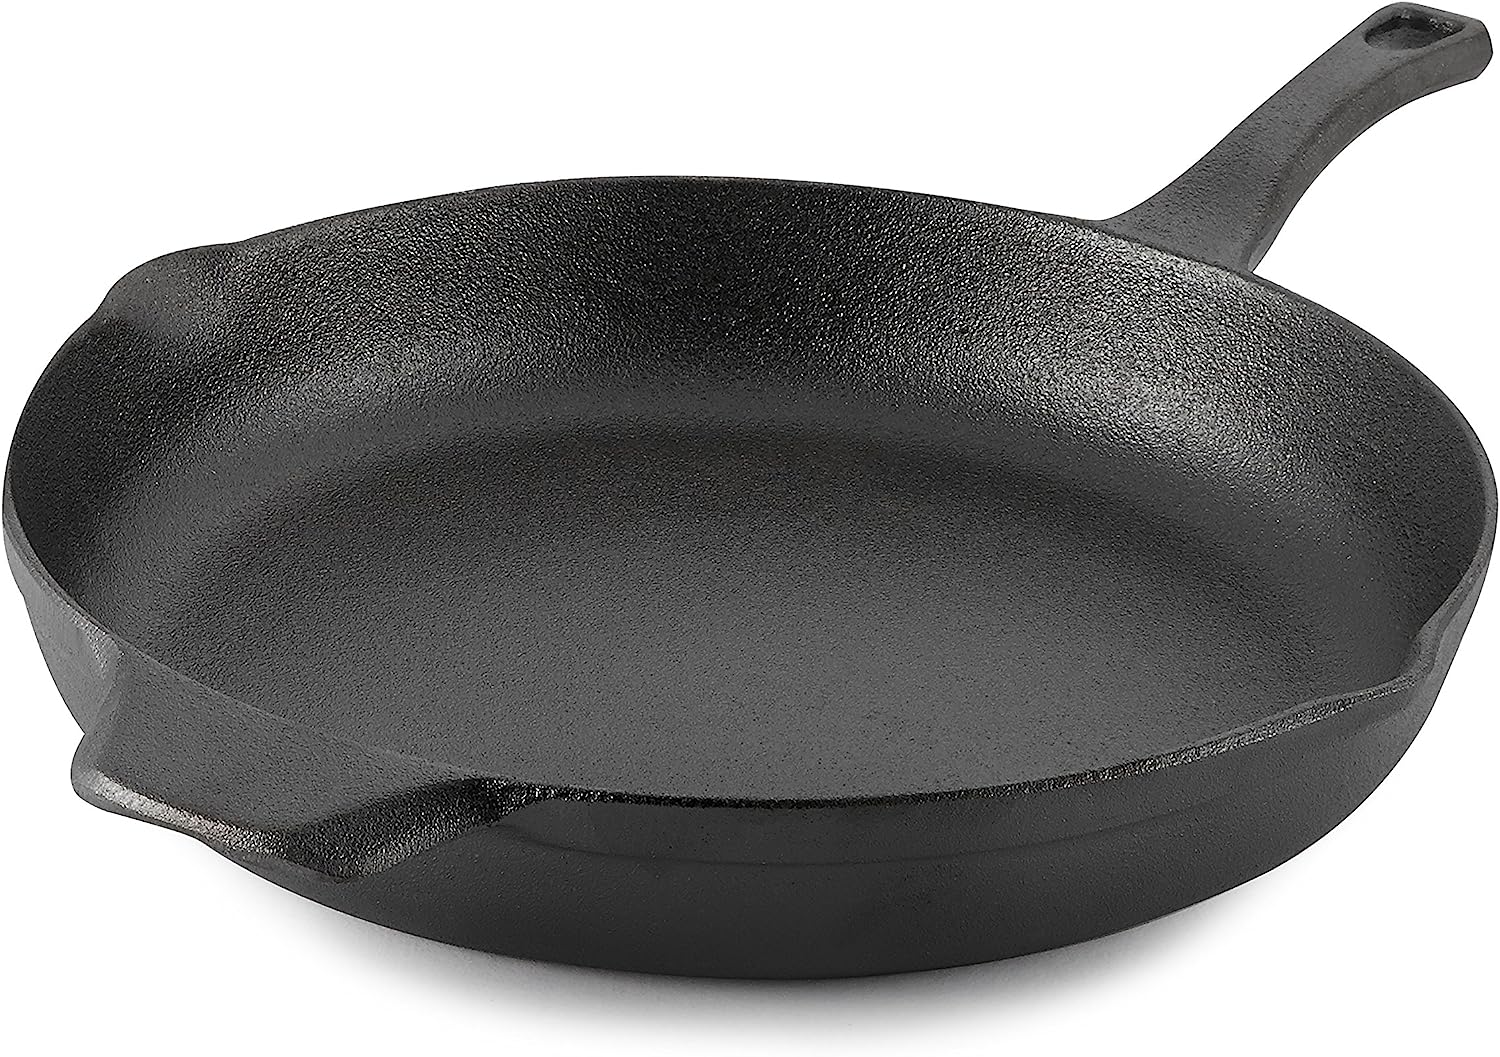 https://bigbigmart.com/wp-content/uploads/2023/09/Calphalon-Cast-Iron-Skillet-Pre-Seasoned-Cookware-with-Large-Handles-and-Pour-Spouts-12-Inch-Black.jpg